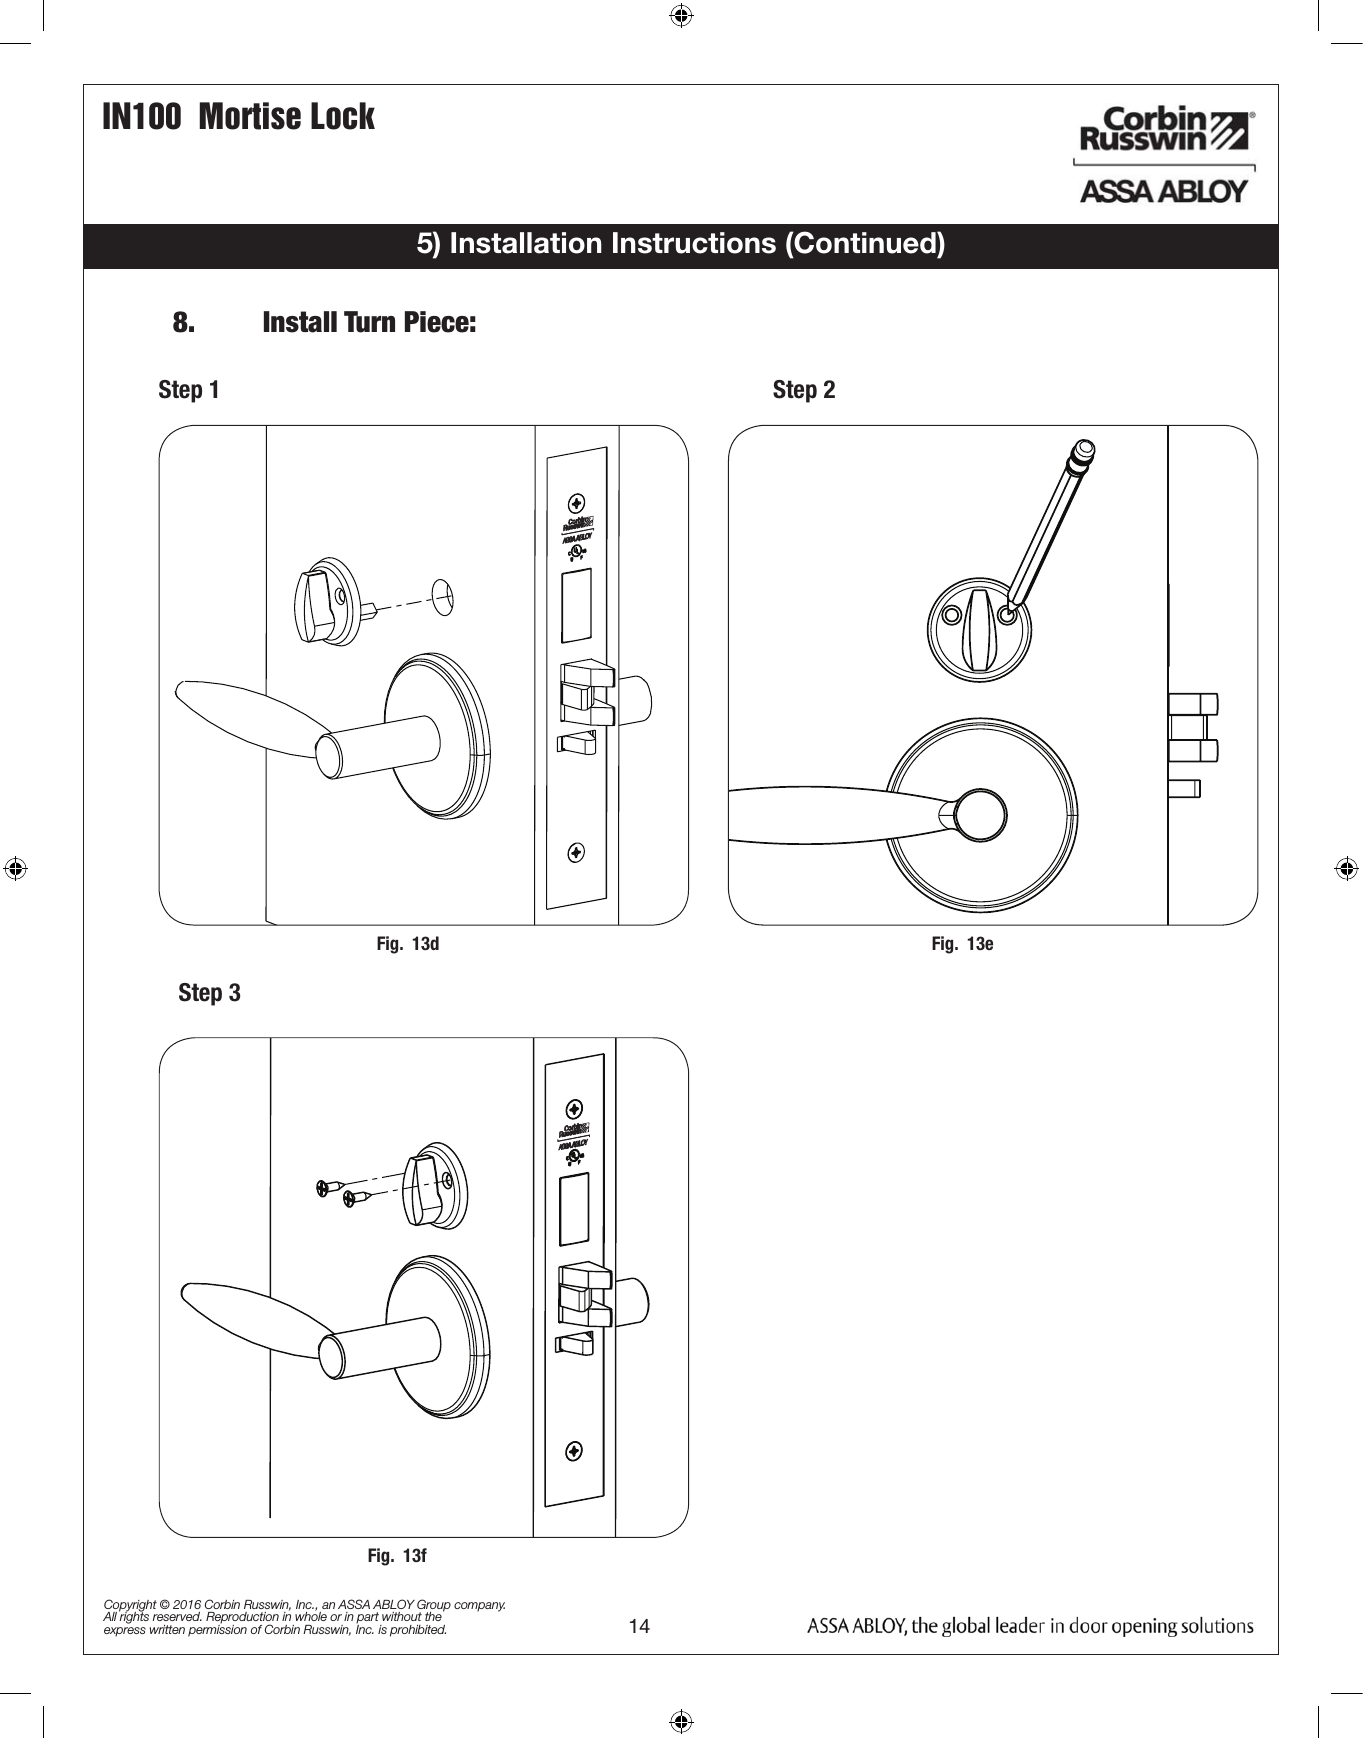 IN100  Mortise Lock14Copyright © 2016 Corbin Russwin, Inc., an ASSA ABLOY Group company. All rights reserved. Reproduction in whole or in part without the express written permission of Corbin Russwin, Inc. is prohibited.5) Installation Instructions (Continued)Step 18.   Install Turn Piece:Step 2Step 3Fig.  13d Fig.  13eFig.  13f